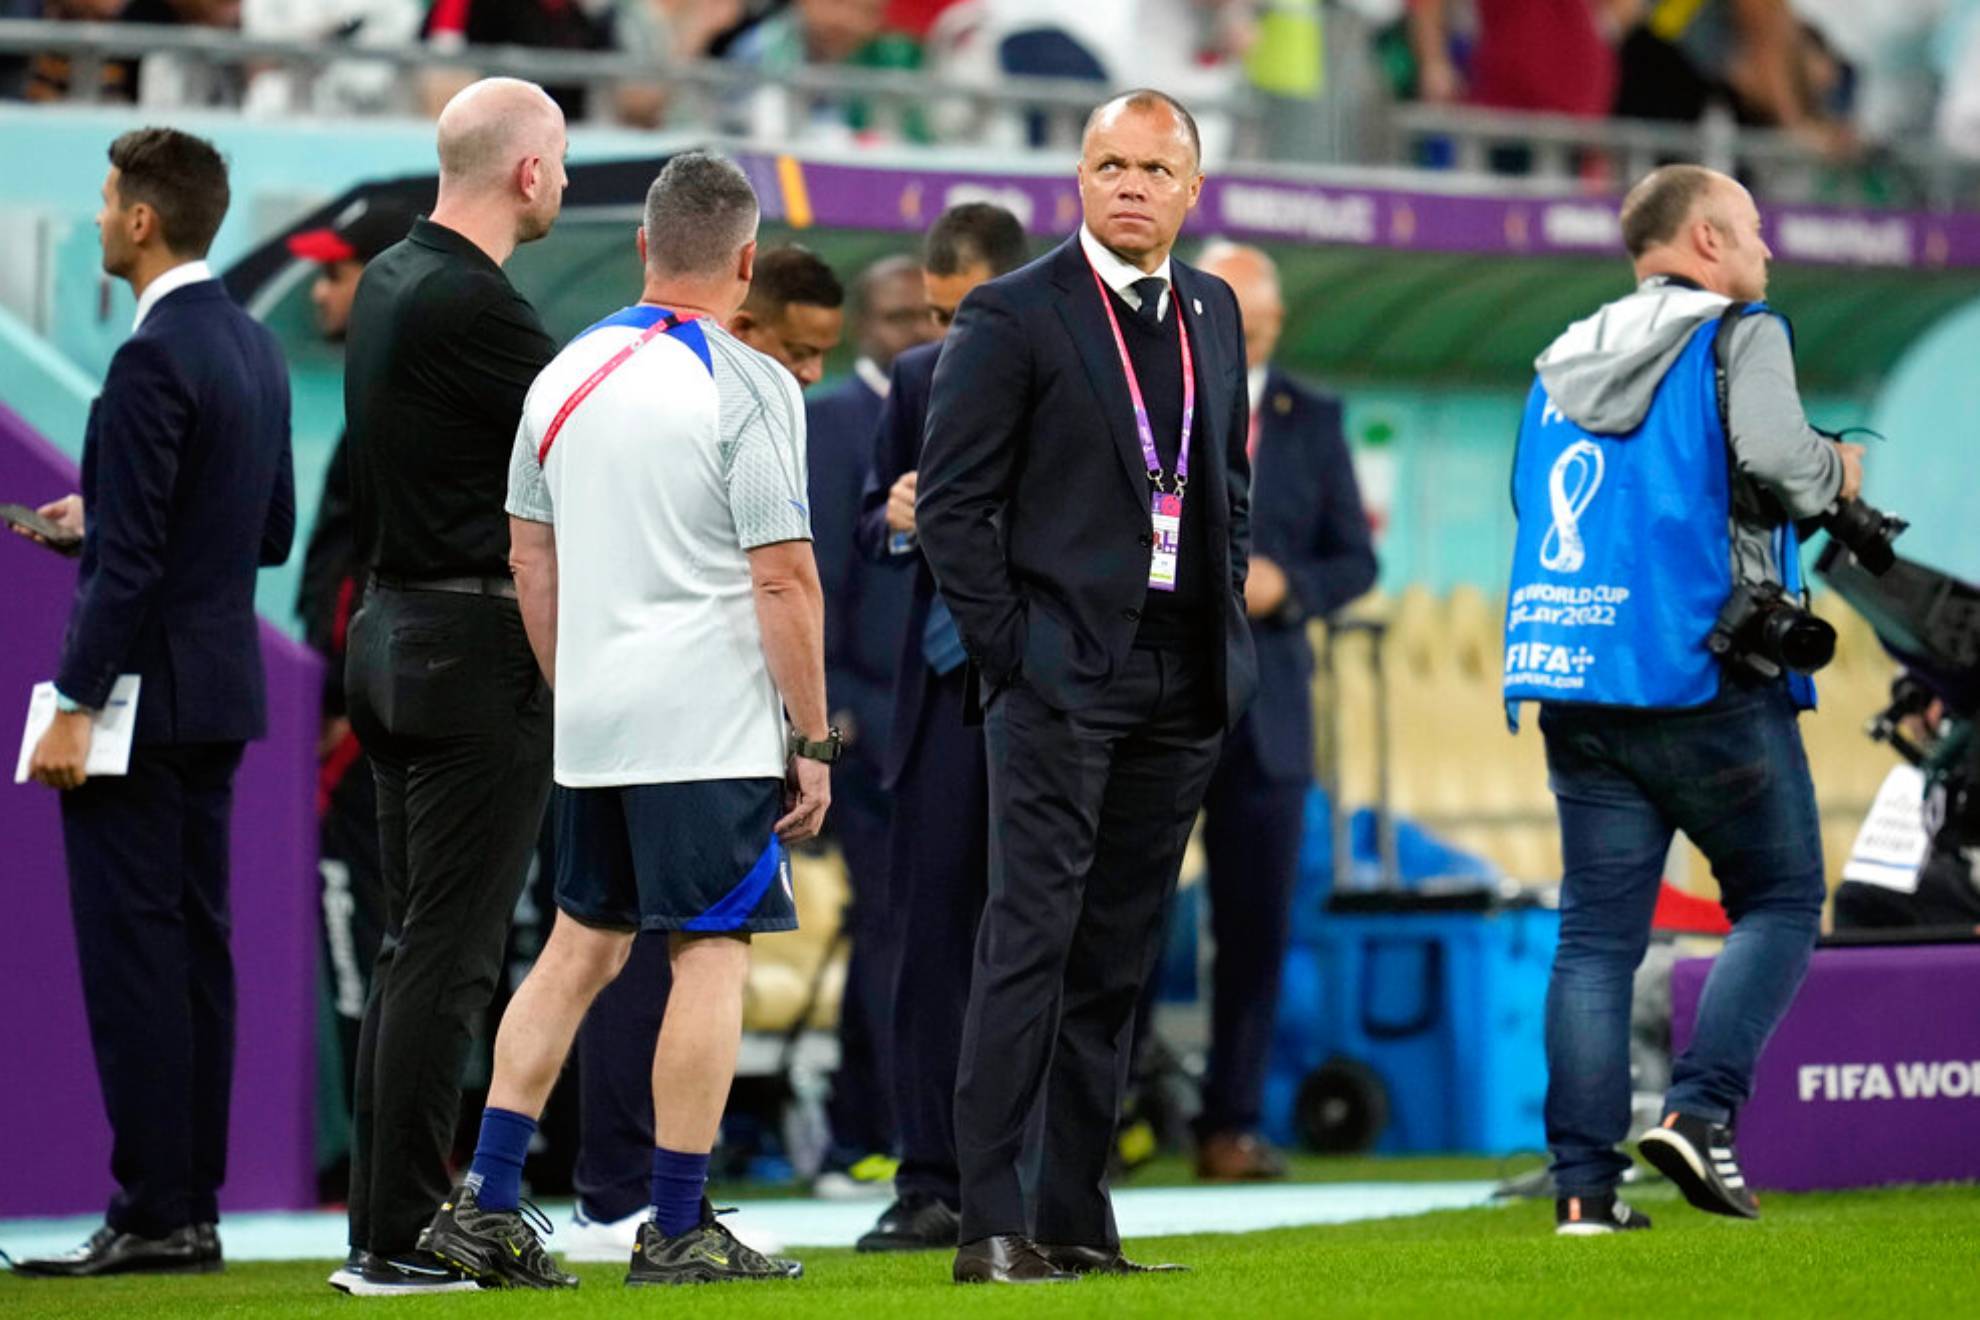 U.S. Soccer Federation sporting director Earnie Stewart stands on the field before the World Cup group B soccer match between Iran and the United States at the Al Thumama Stadium in Doha